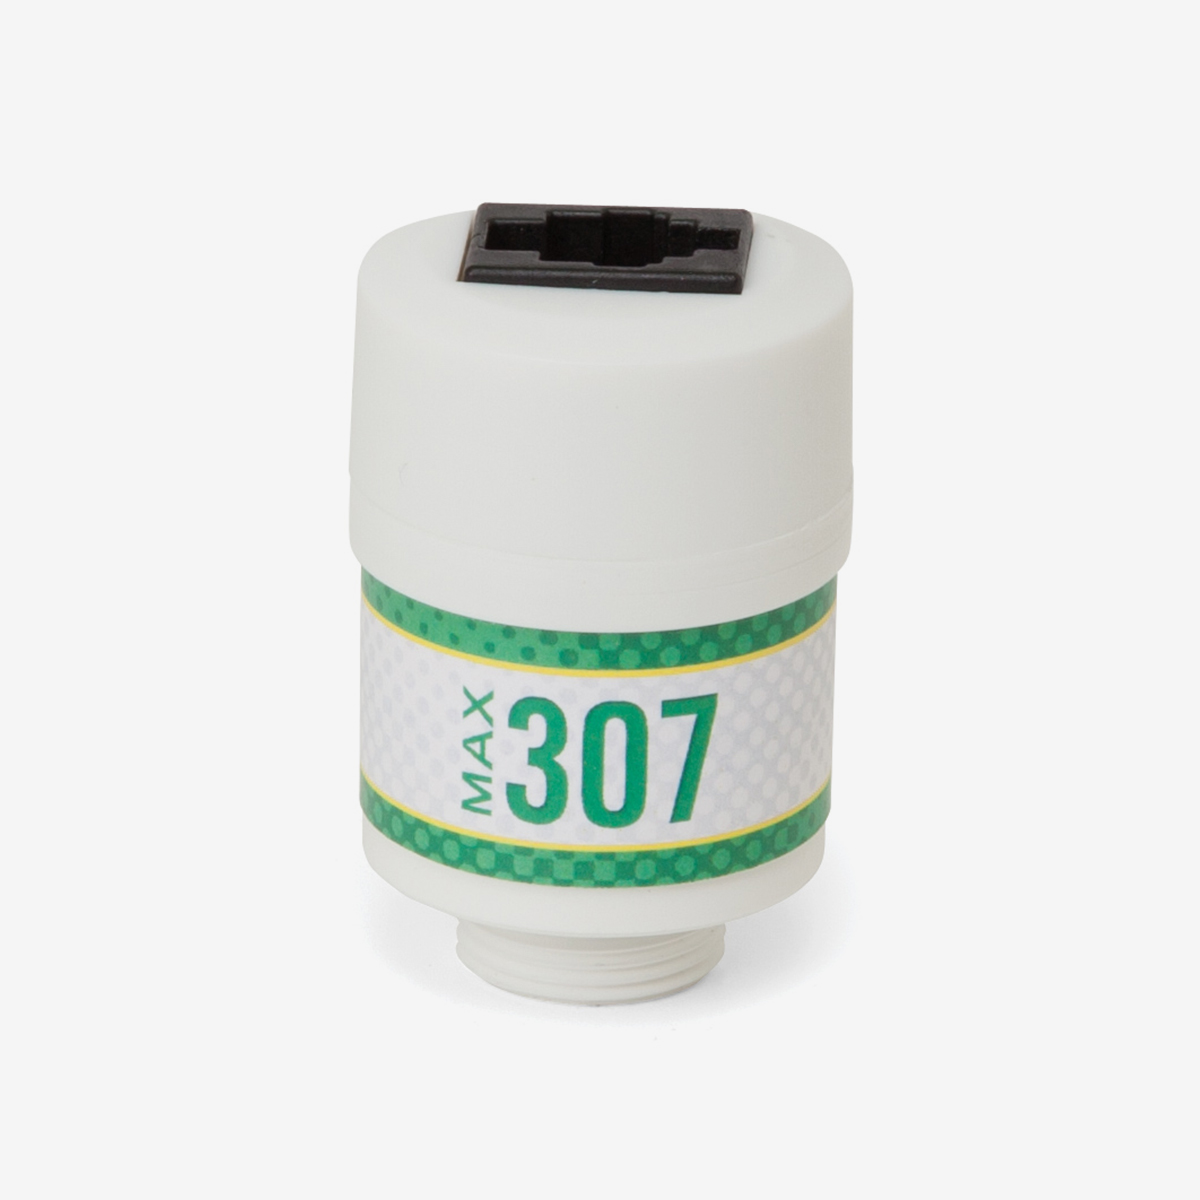 White and green cylindrical Max-307 scuba sensor with black outlet on top on white background